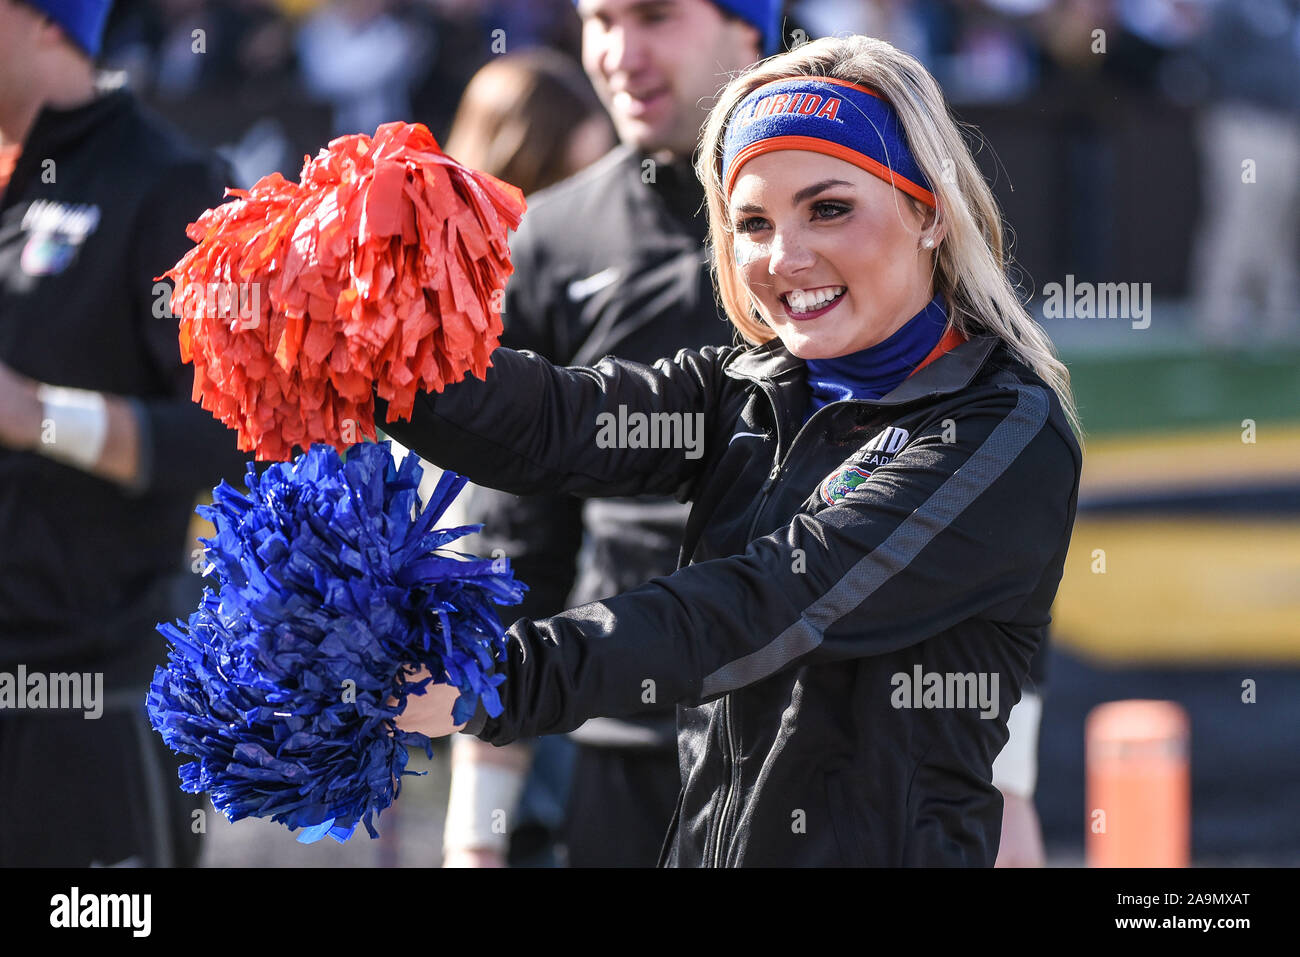 Nov 16, 2019: A Florida cheerleader performs during an SEC conference game where the Florida Gators visited the Missouri Tigers held at Faurot Field at Memorial Stadium in Columbia, MO Richard Ulreich/CSM Stock Photo